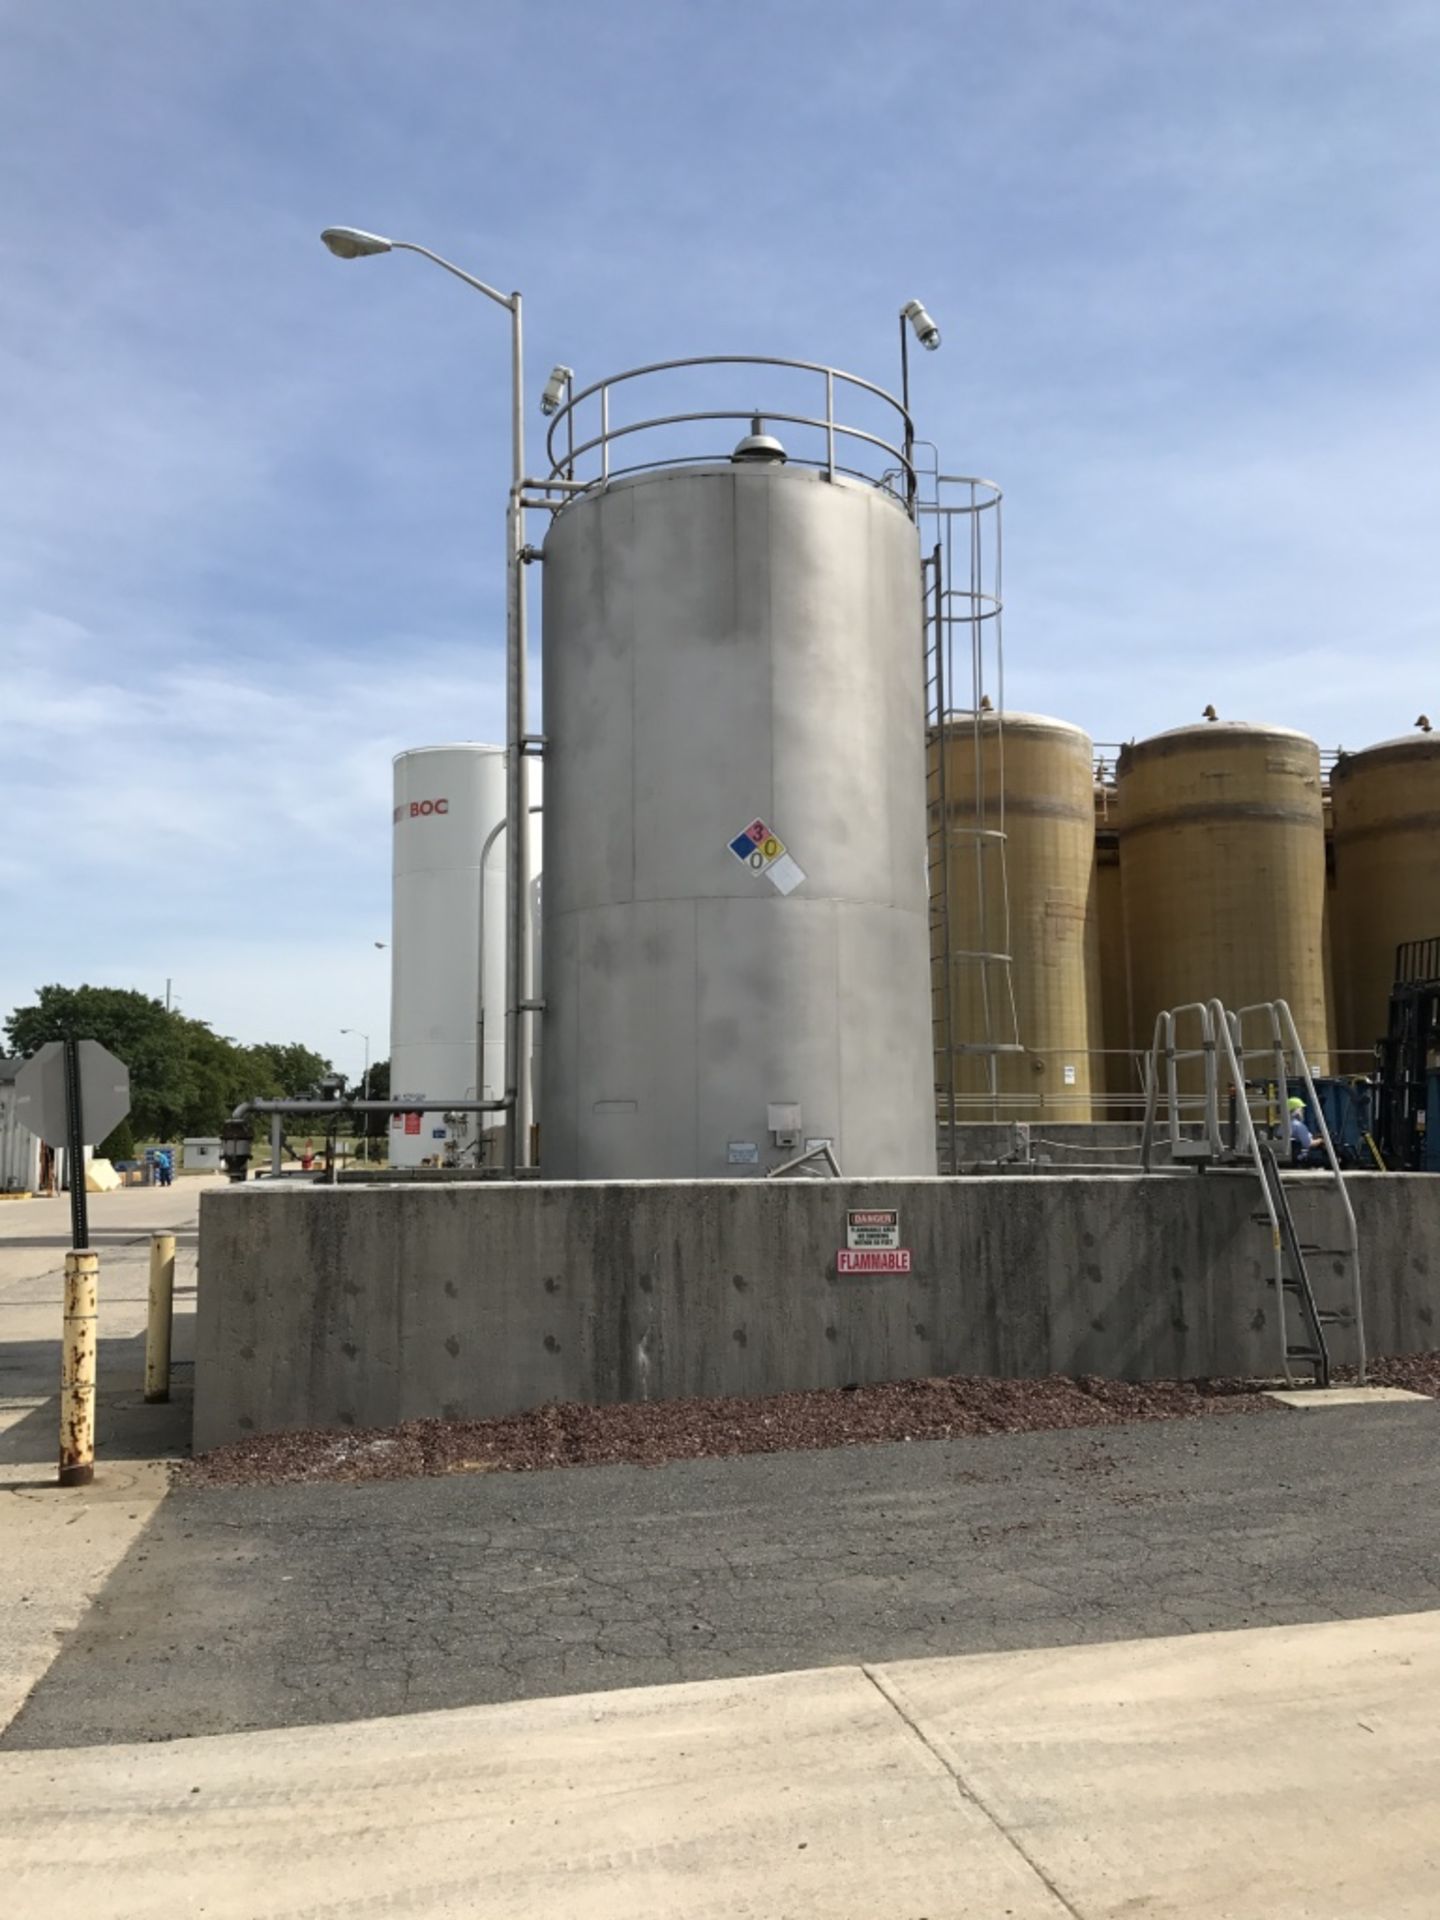 Stainless Alcohol Storage Tank Approximate 20,000 Gallons